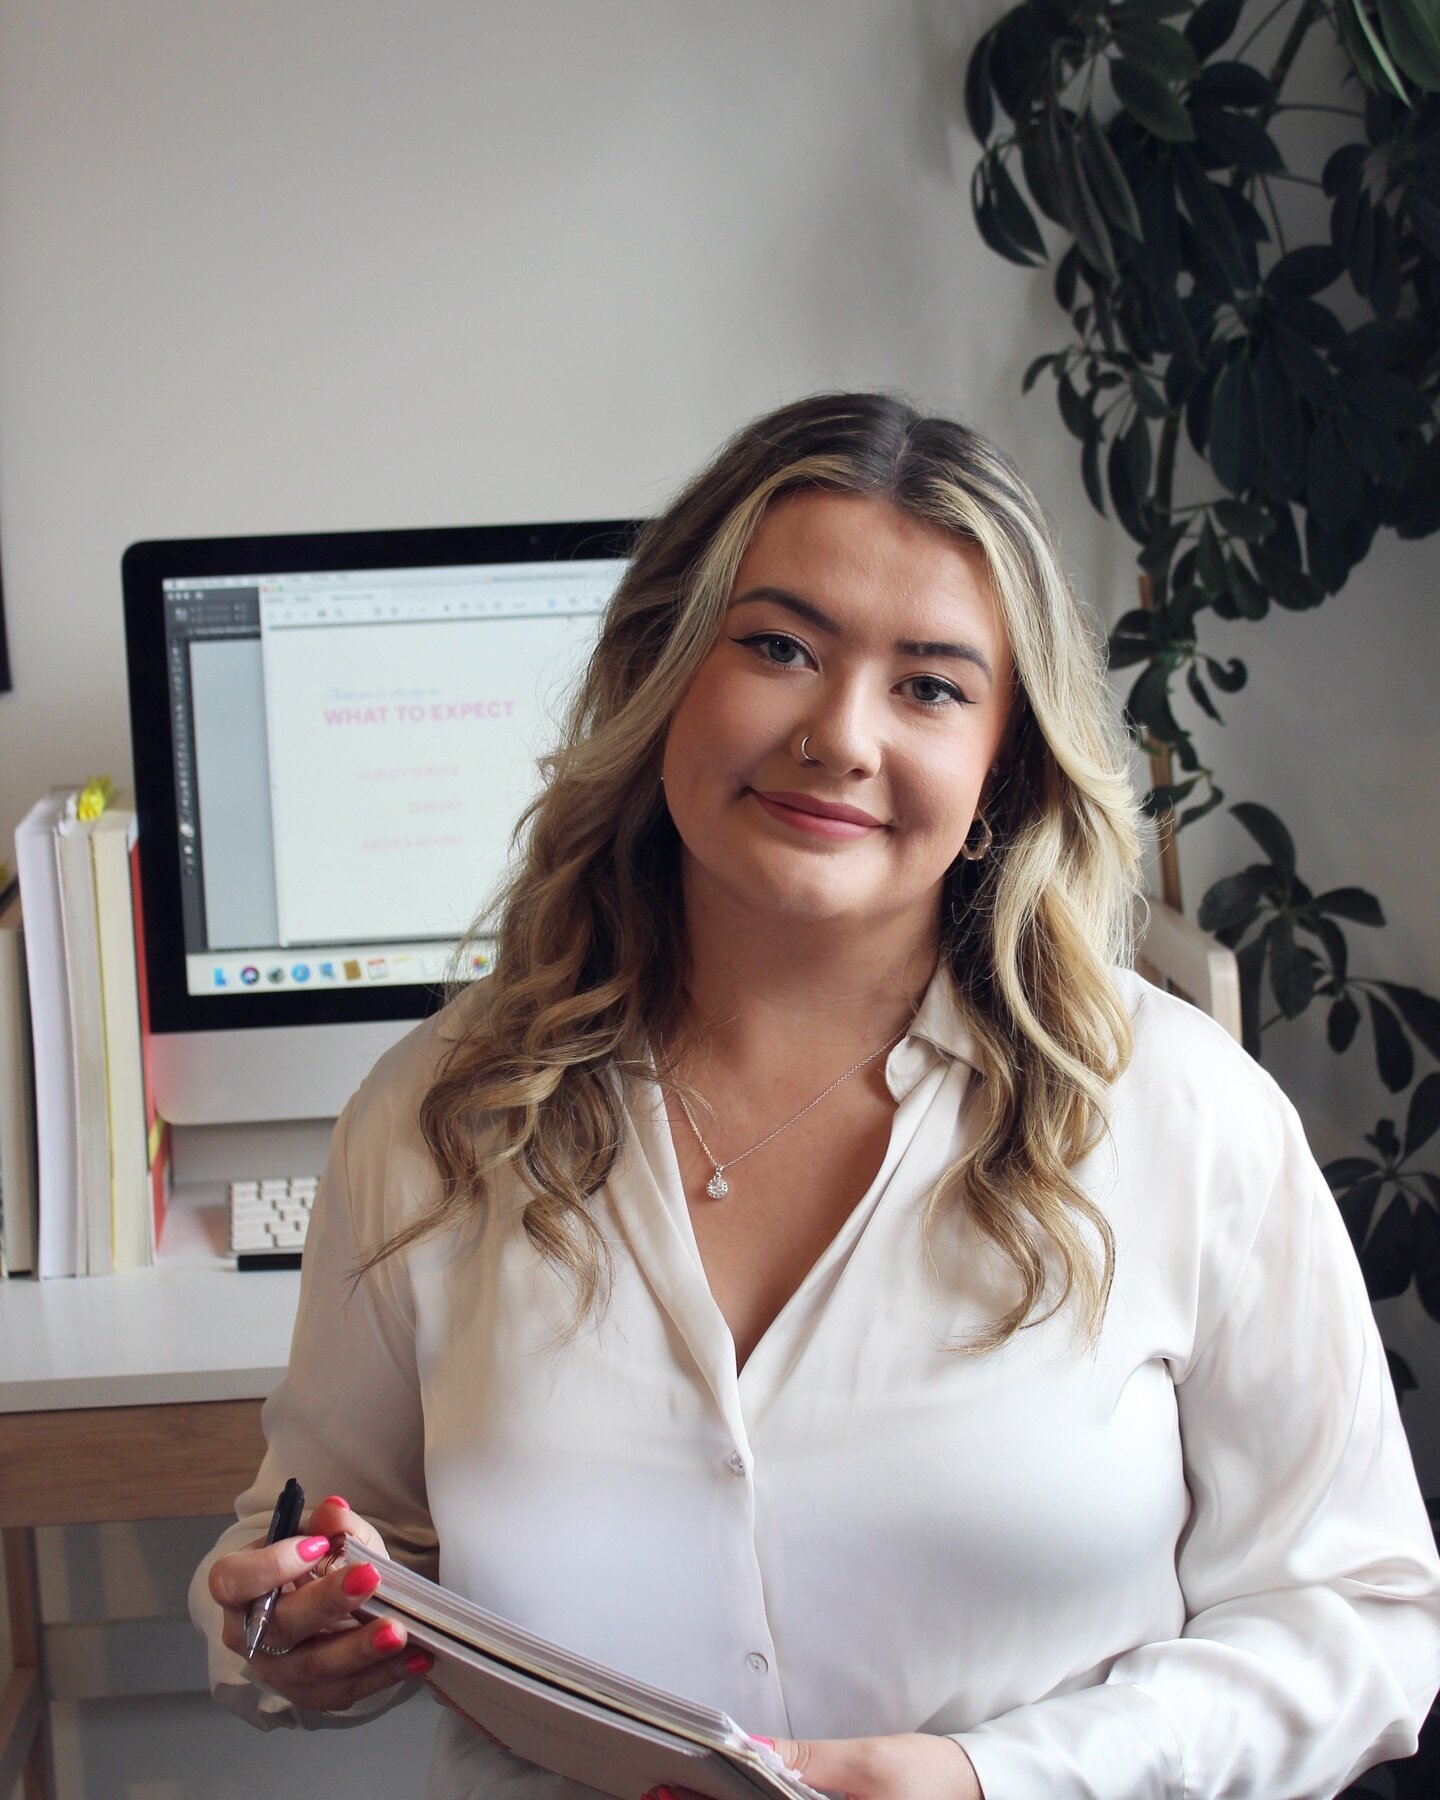 I&rsquo;m Daisy, a graphic designer based in West Sussex and the person behind Daisy Wilkinson Design✨ 

I have been a designer for over seven years and now specialise in brand, web and stationery design. I love working with businesses and organisati